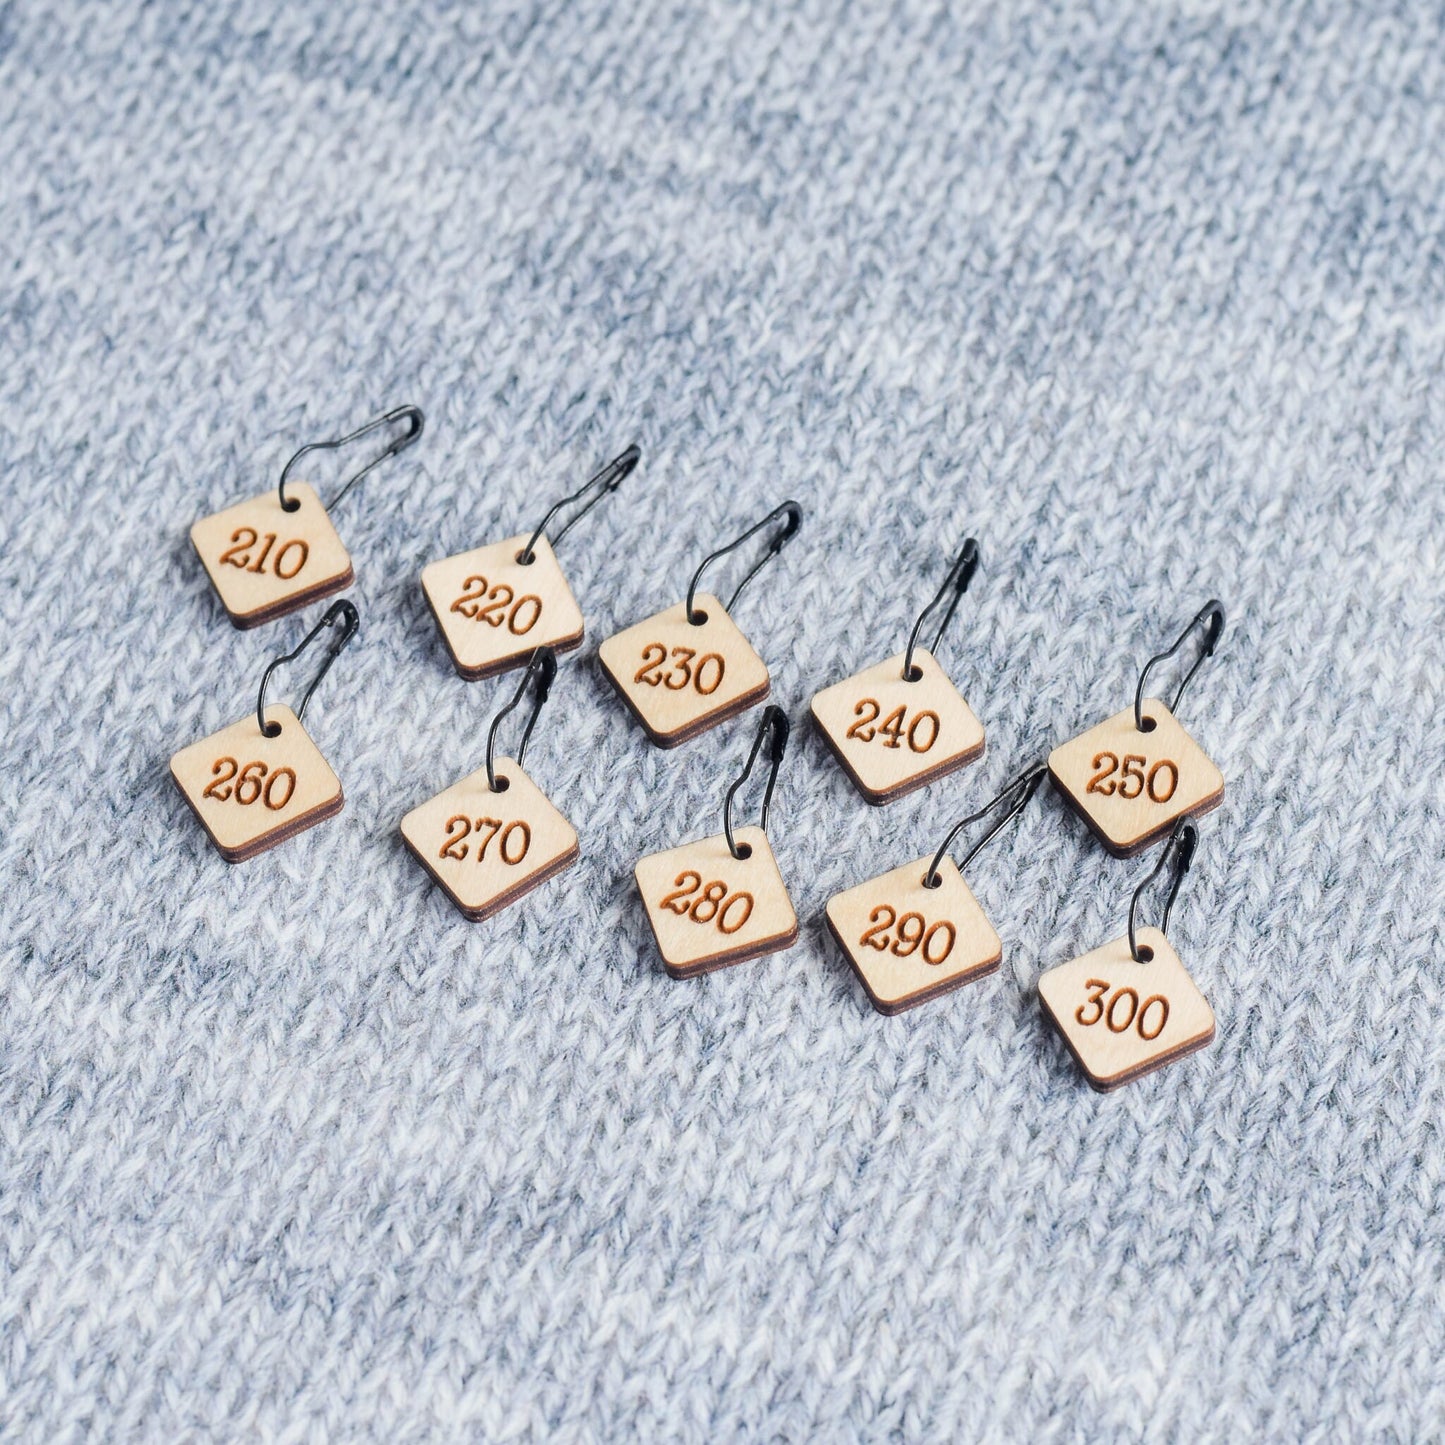 Set of 10 Removable Stitch Markers - 210-300 - Cast On Counting Numbers, Laser Engraved Wood Stitch Markers, Counting Stitch Markers - Birch